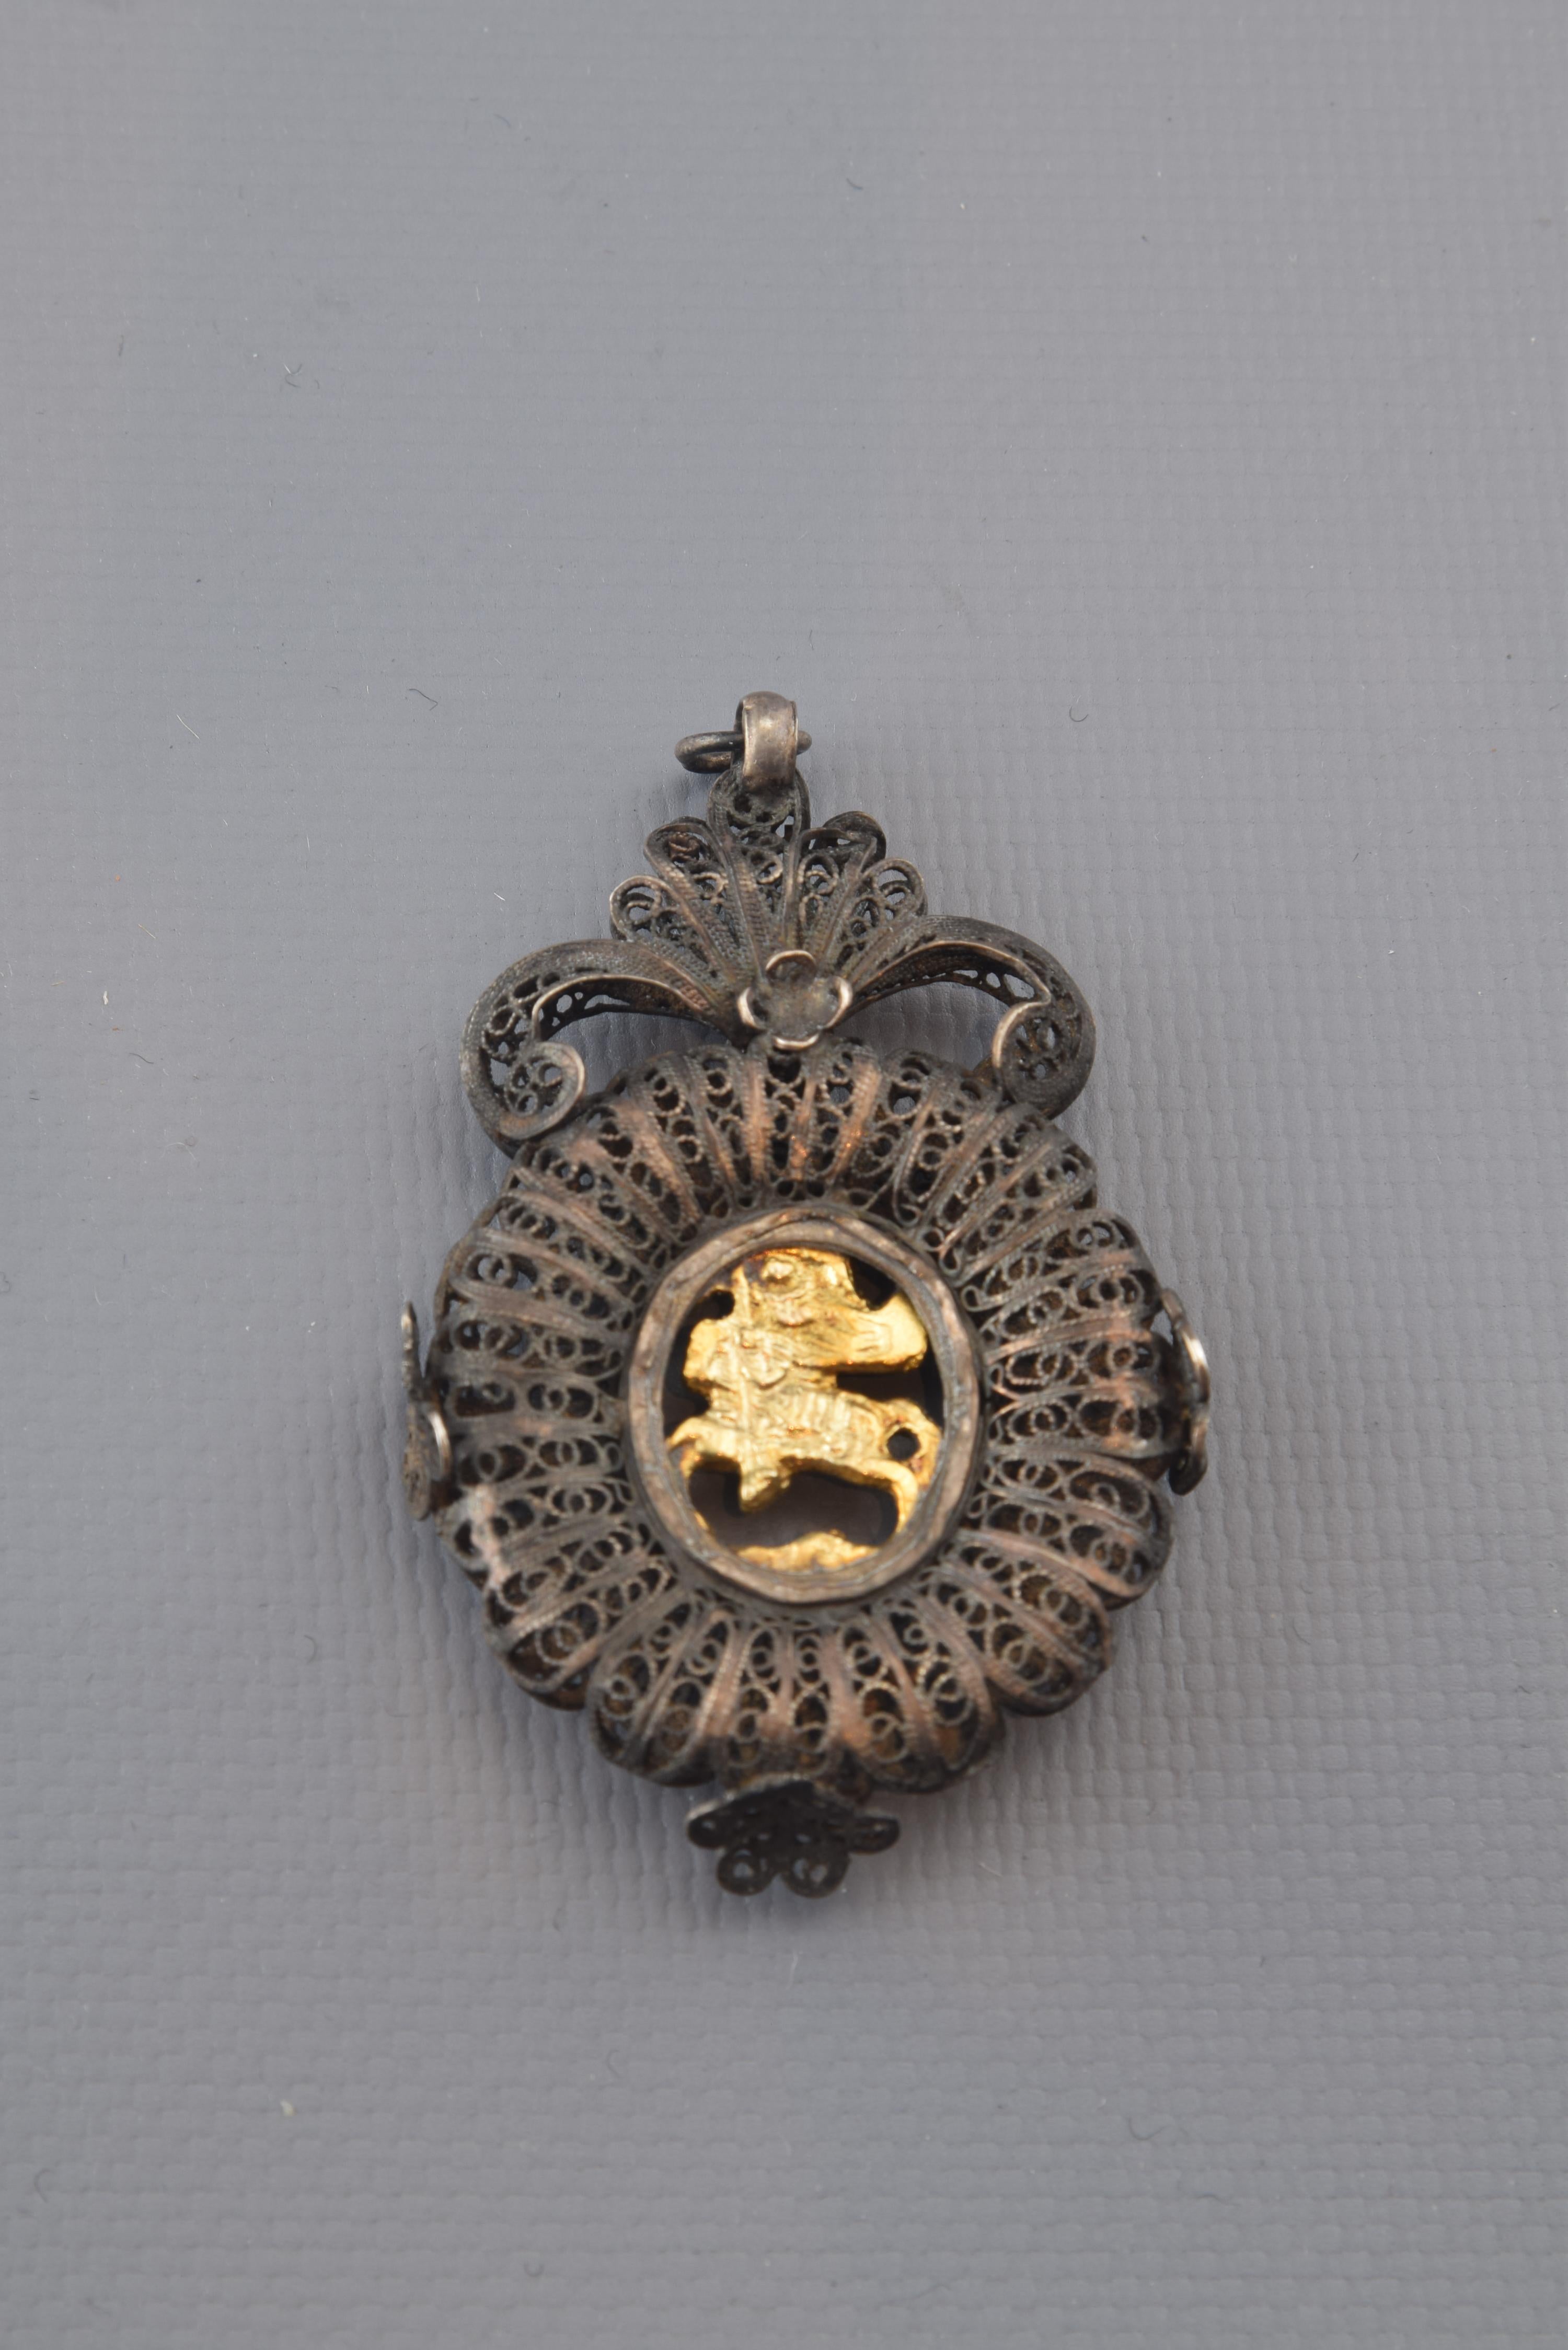 Devotional pendant with St. George. Silver filigree and gilt silver. 19th century.
Silver filigree pendant in its color with a top shell-like-decorated (